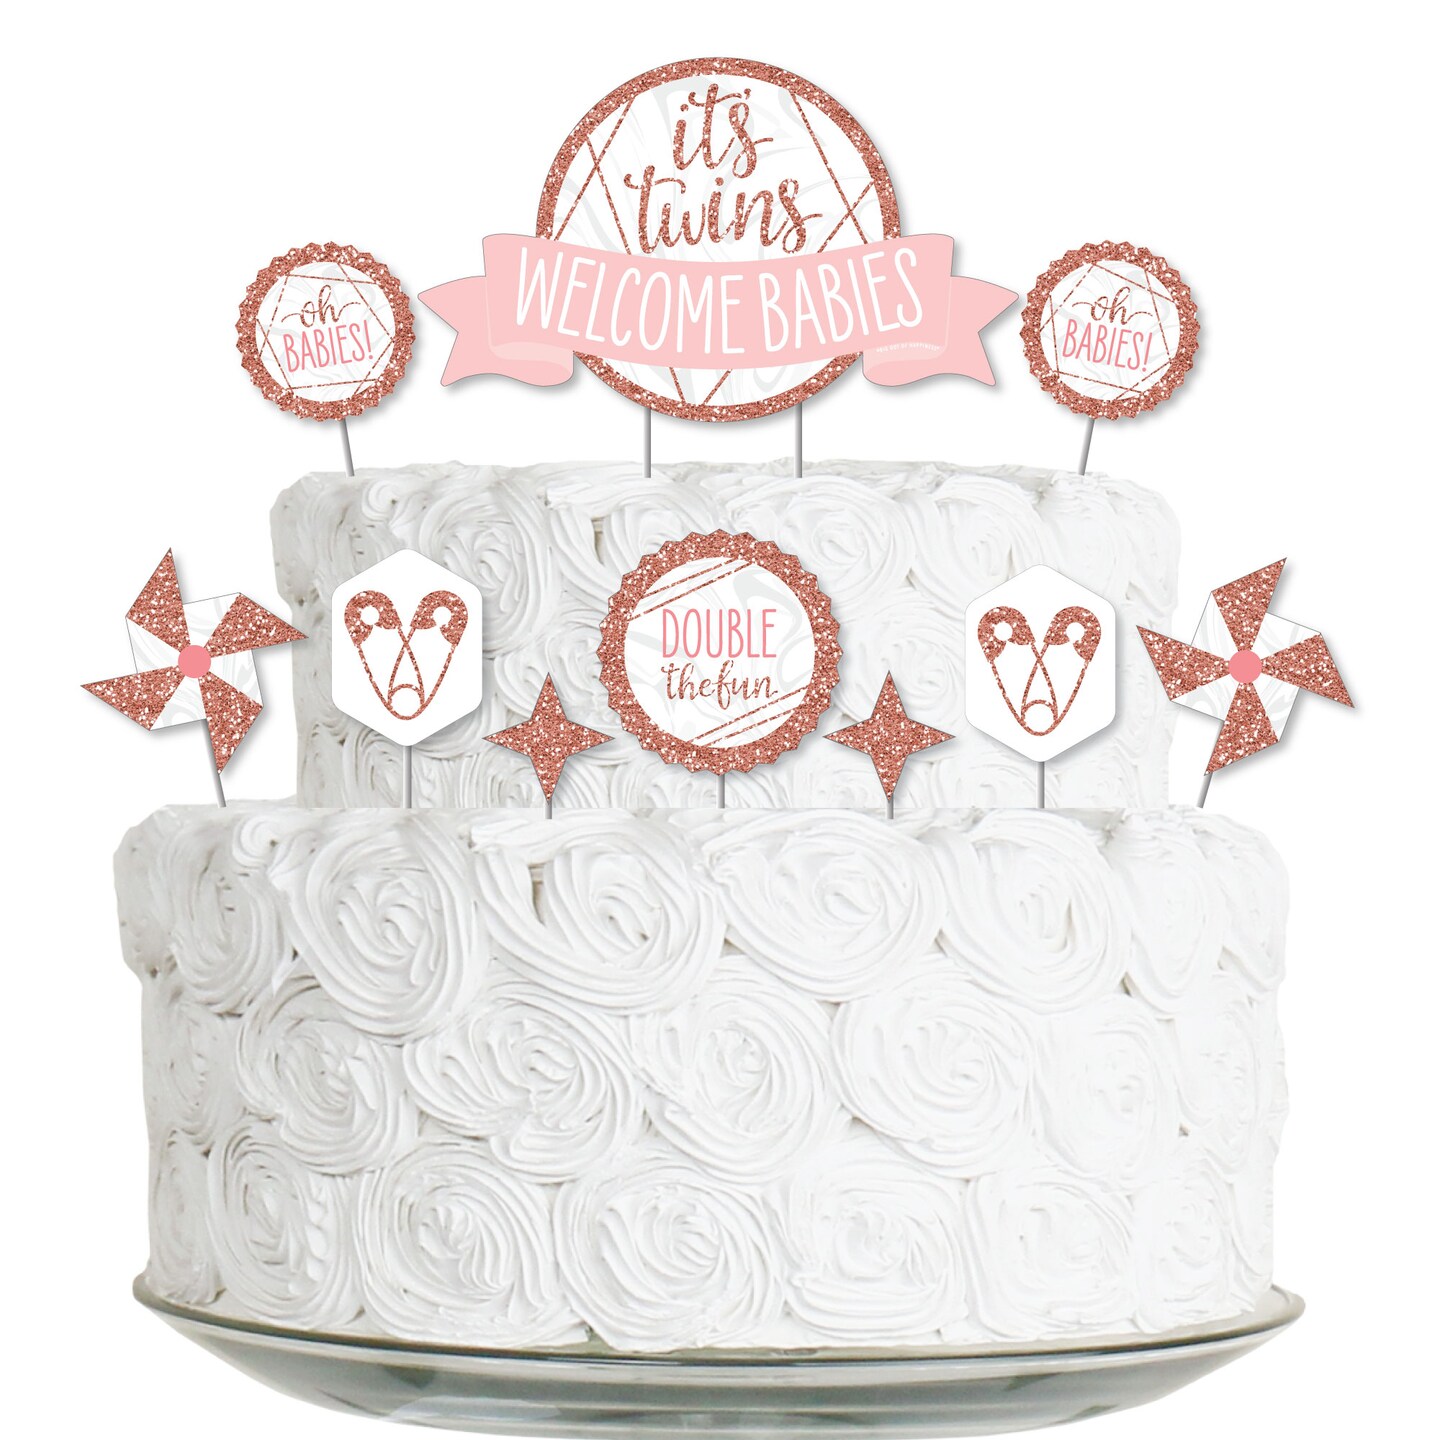 Baby Shower Cakes for Twins - BS106 – Circo's Pastry Shop